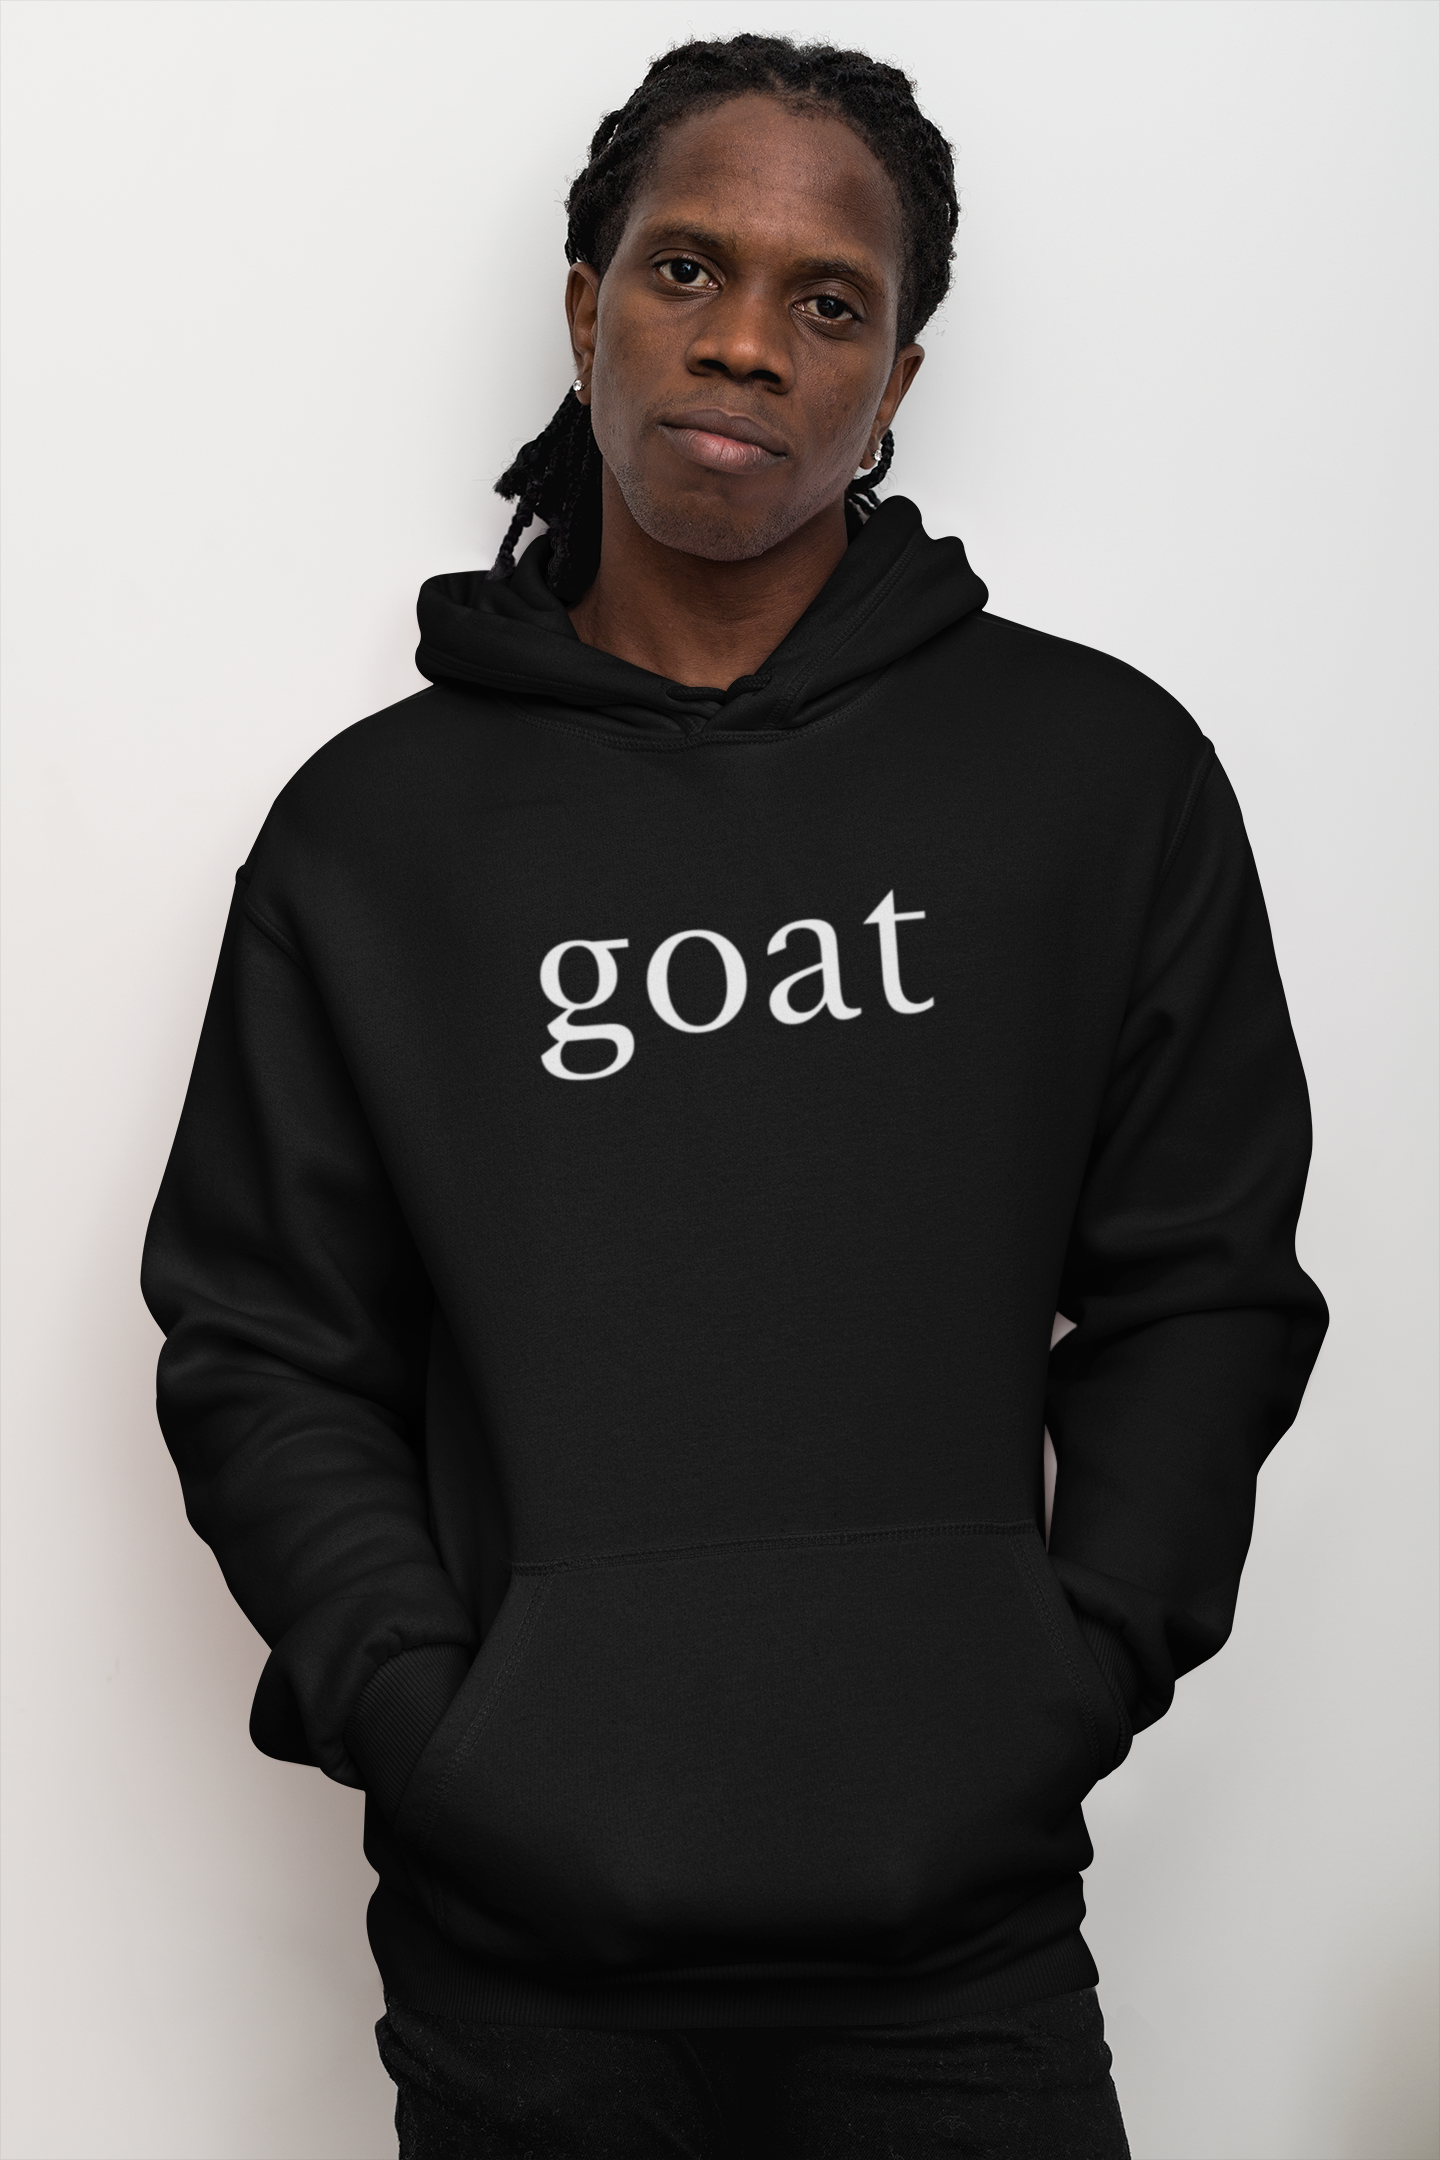 GOAT - Greatest Of All Time  Mens T-shirt 